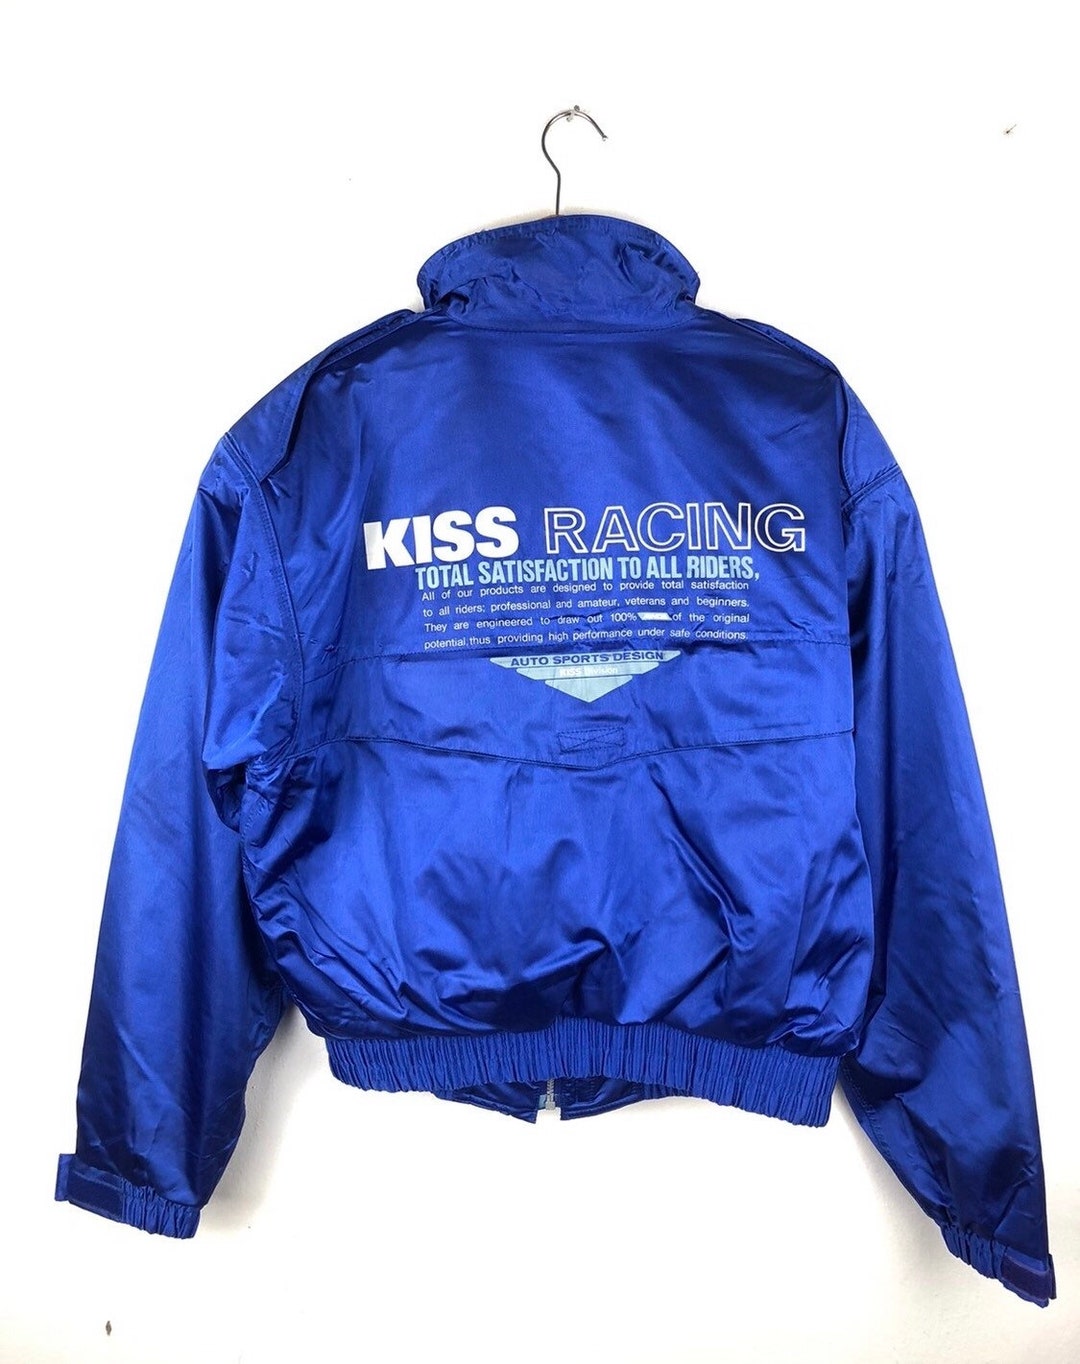 Kiss Racing Team Motosport Jacket picture pic